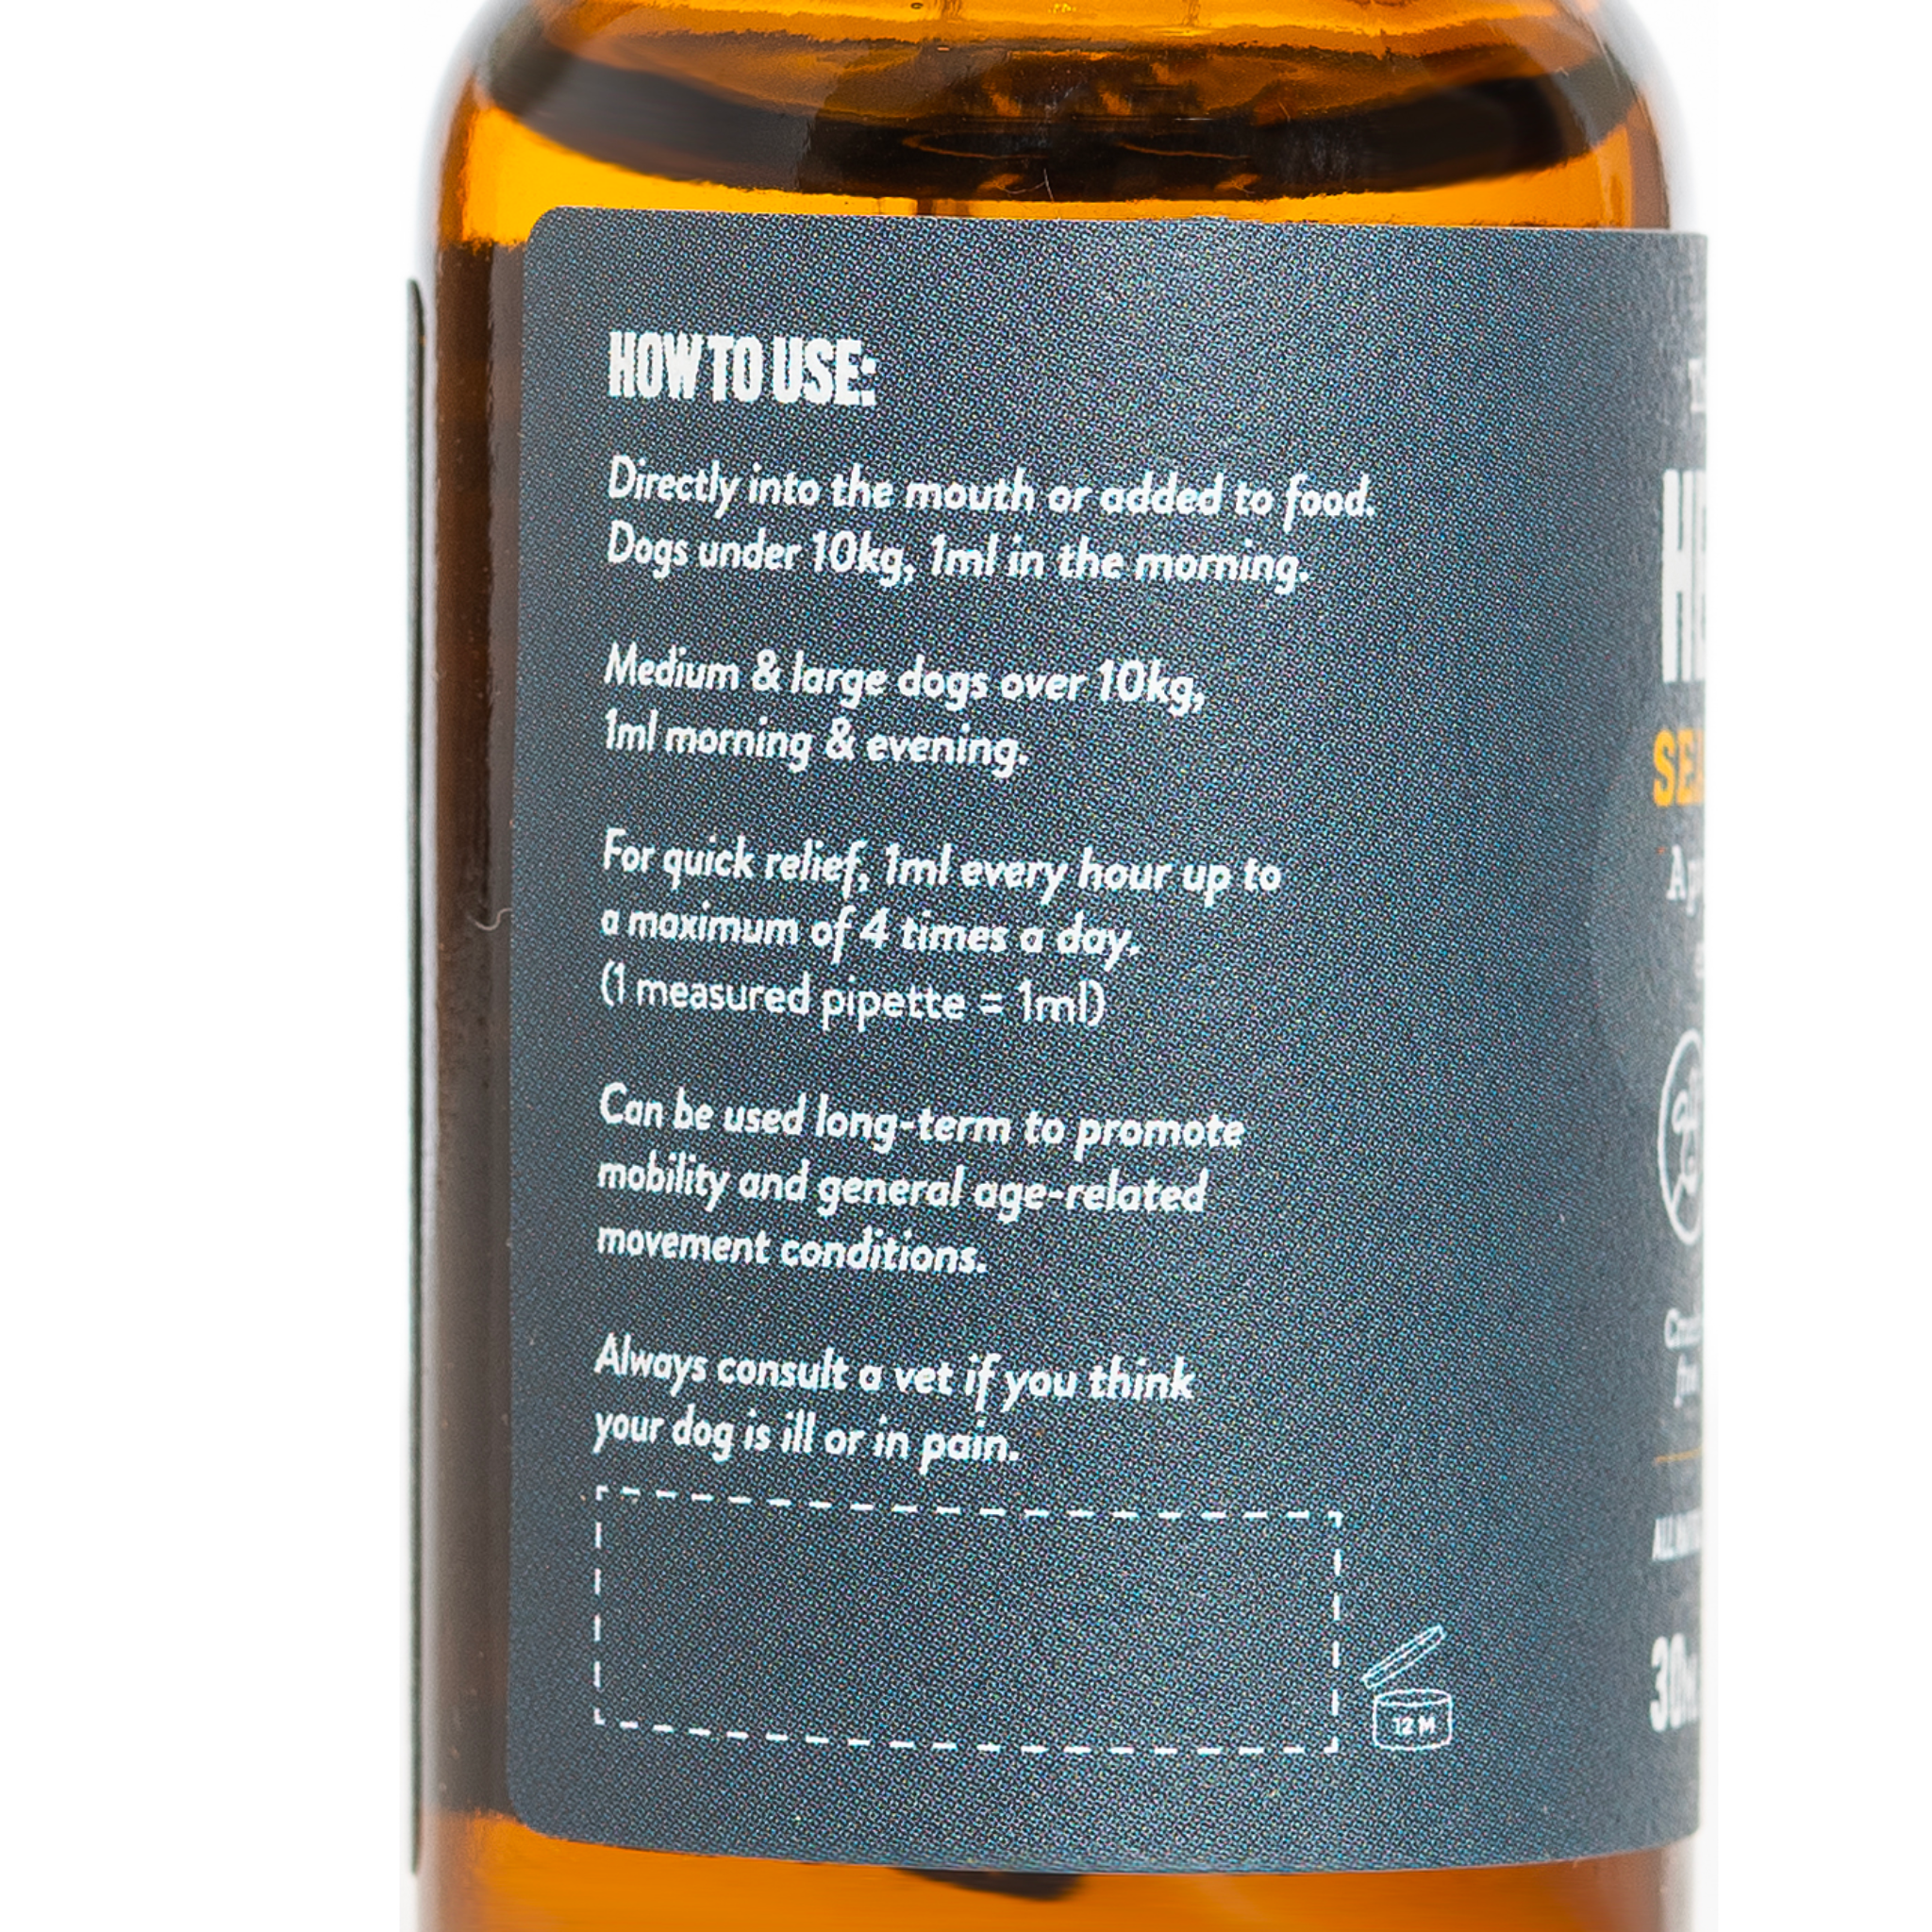 seasonal soother tonic herbal dog co bottle with information on how to safely use it